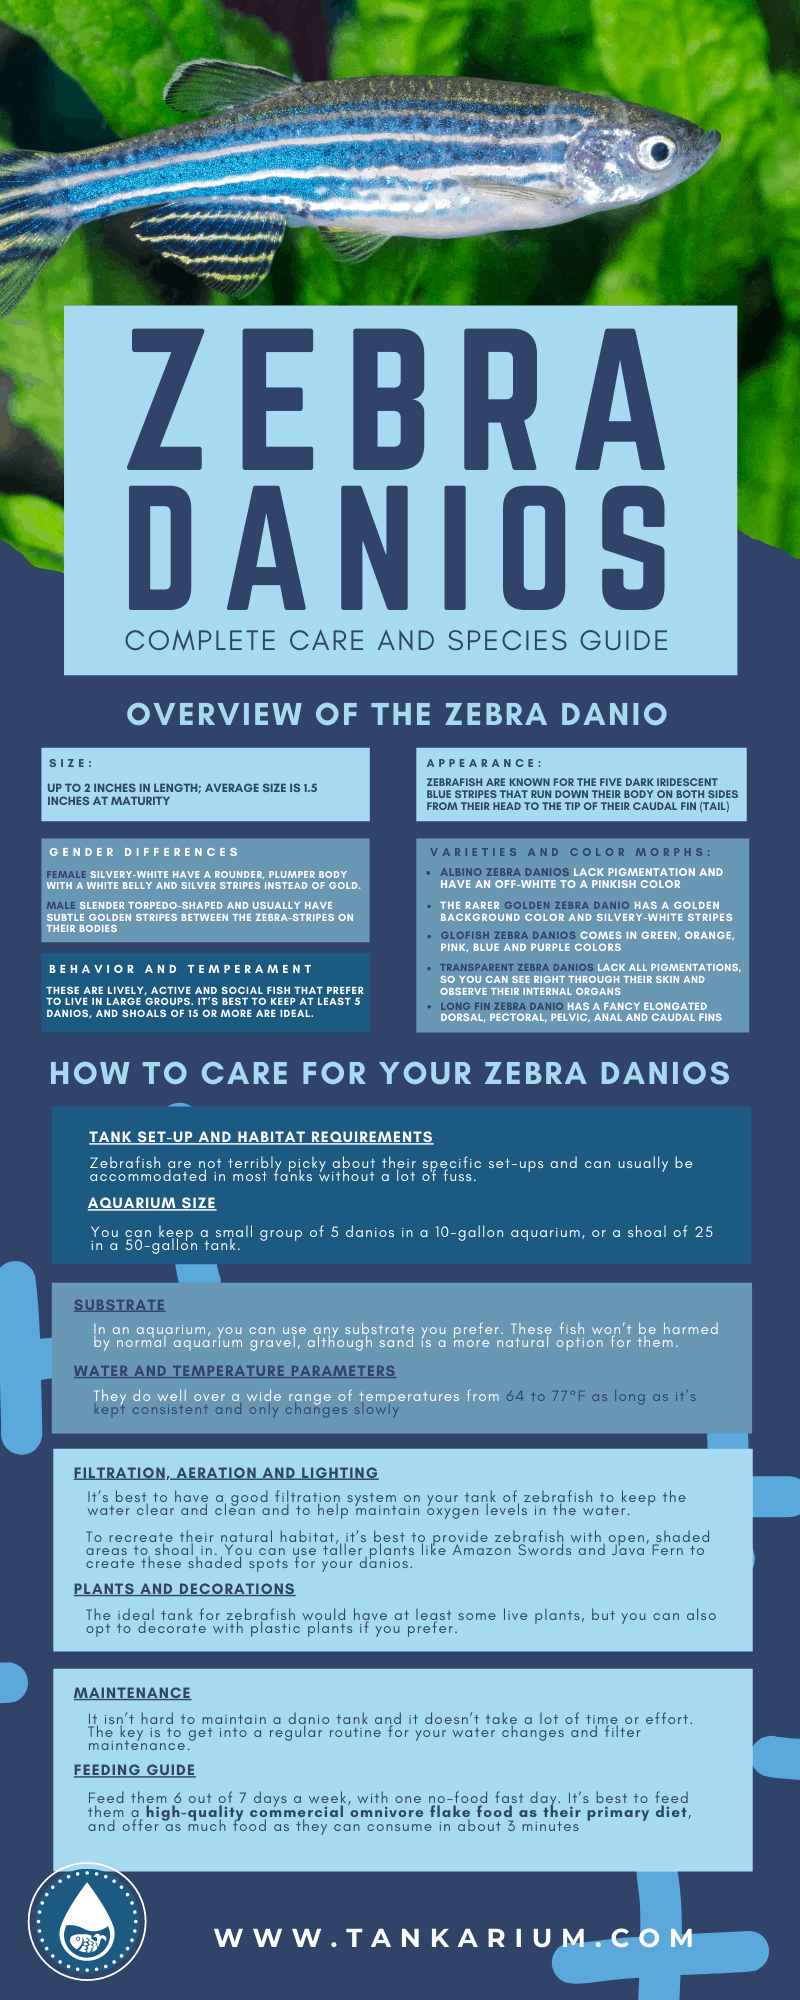 Zebra Danios: Complete Care and Species Guide - Infographic